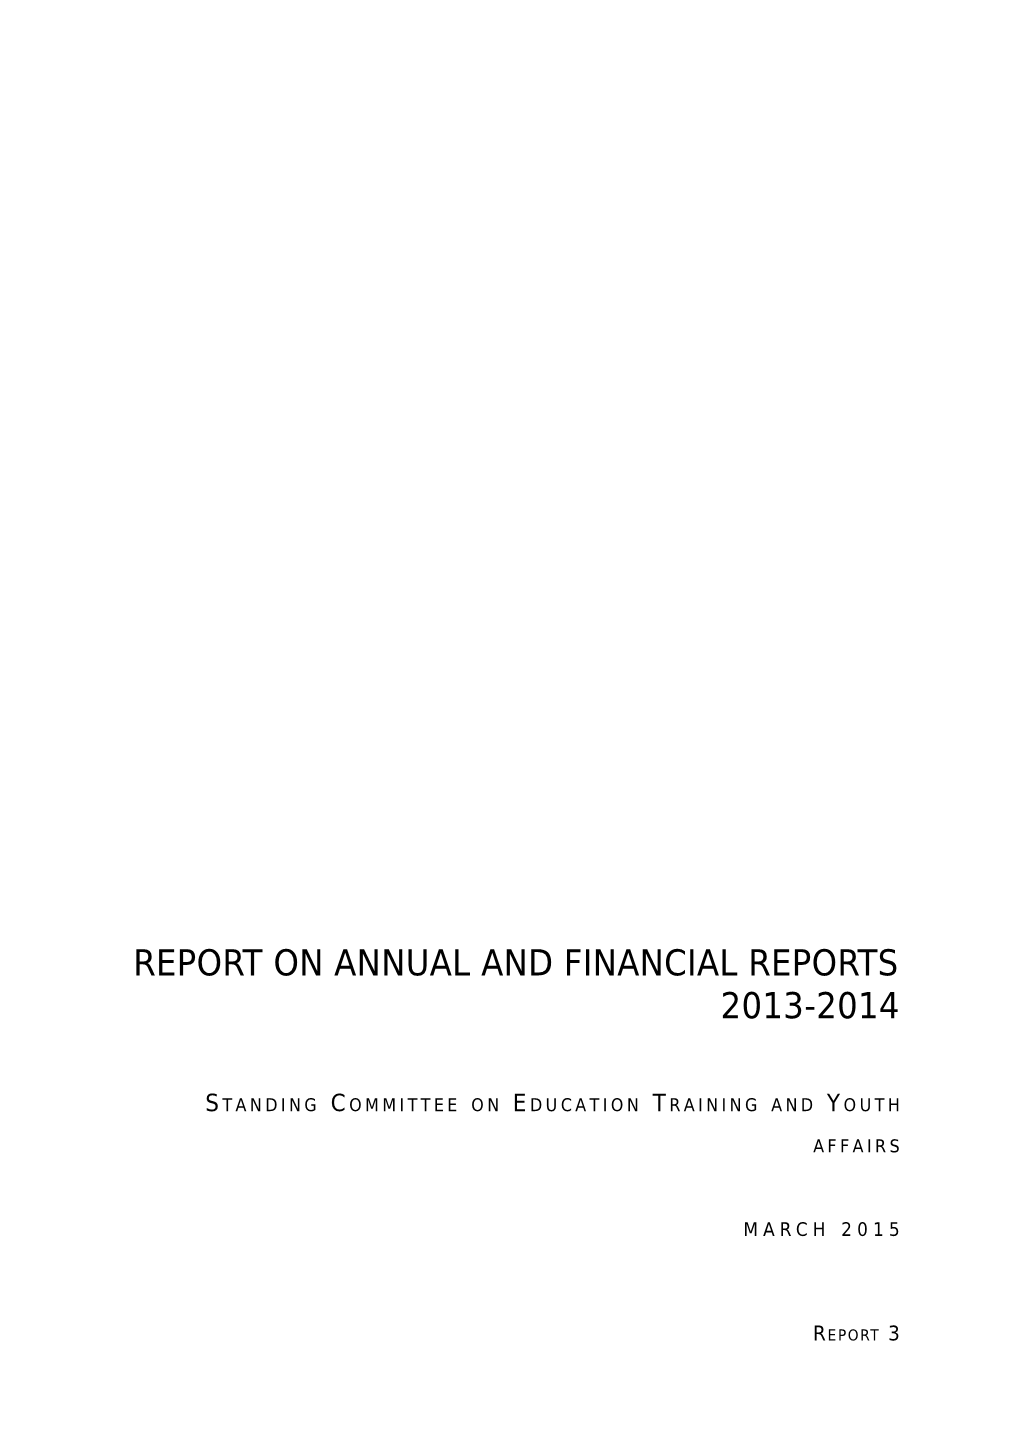 Report on Annual and Financial Reports 2013-2014